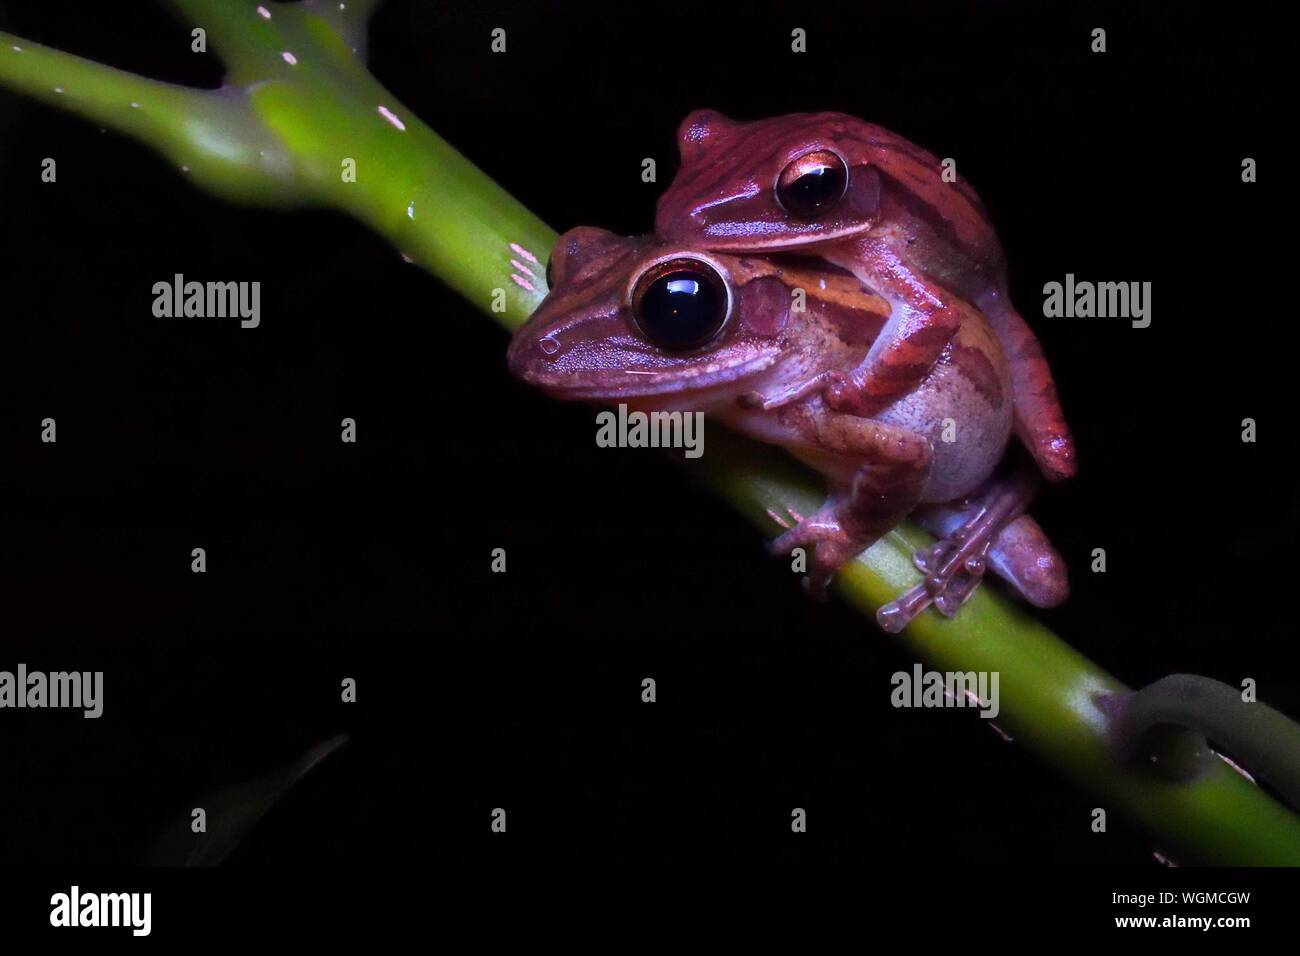 Close-up Of Four-lined Tree Frogs On Plant Stem Stock Photo